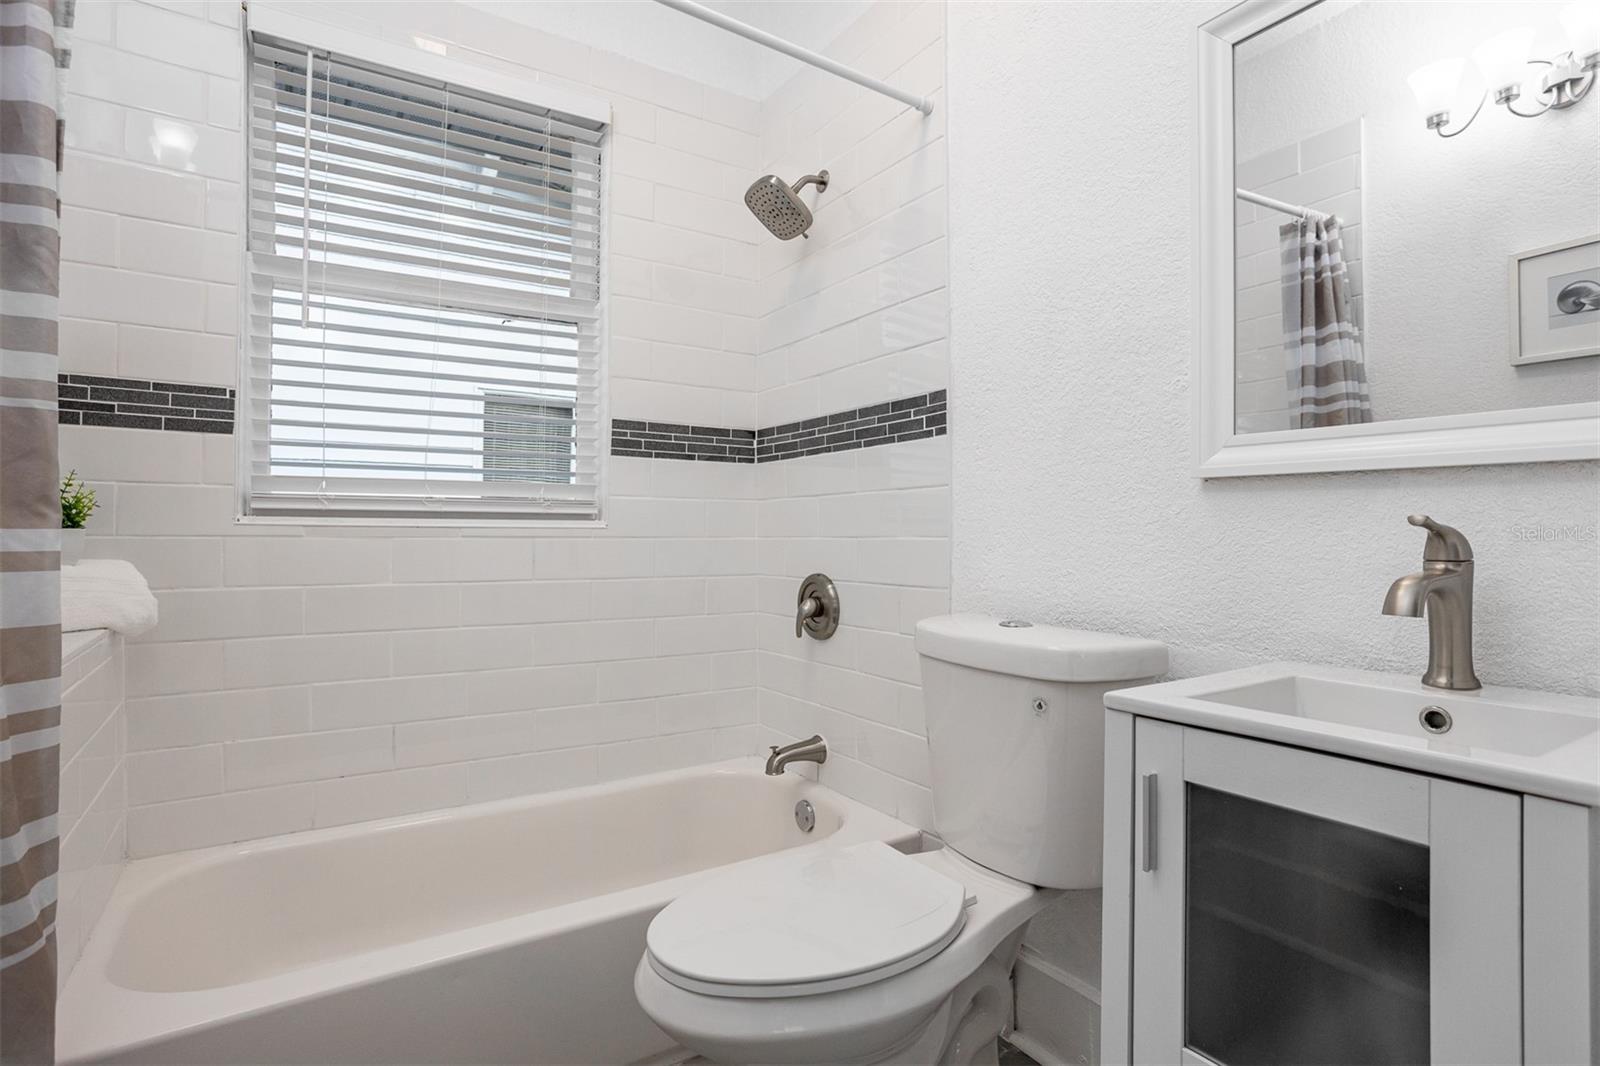 Third bathroom with tub and shower combo between third and fourth bedrooms